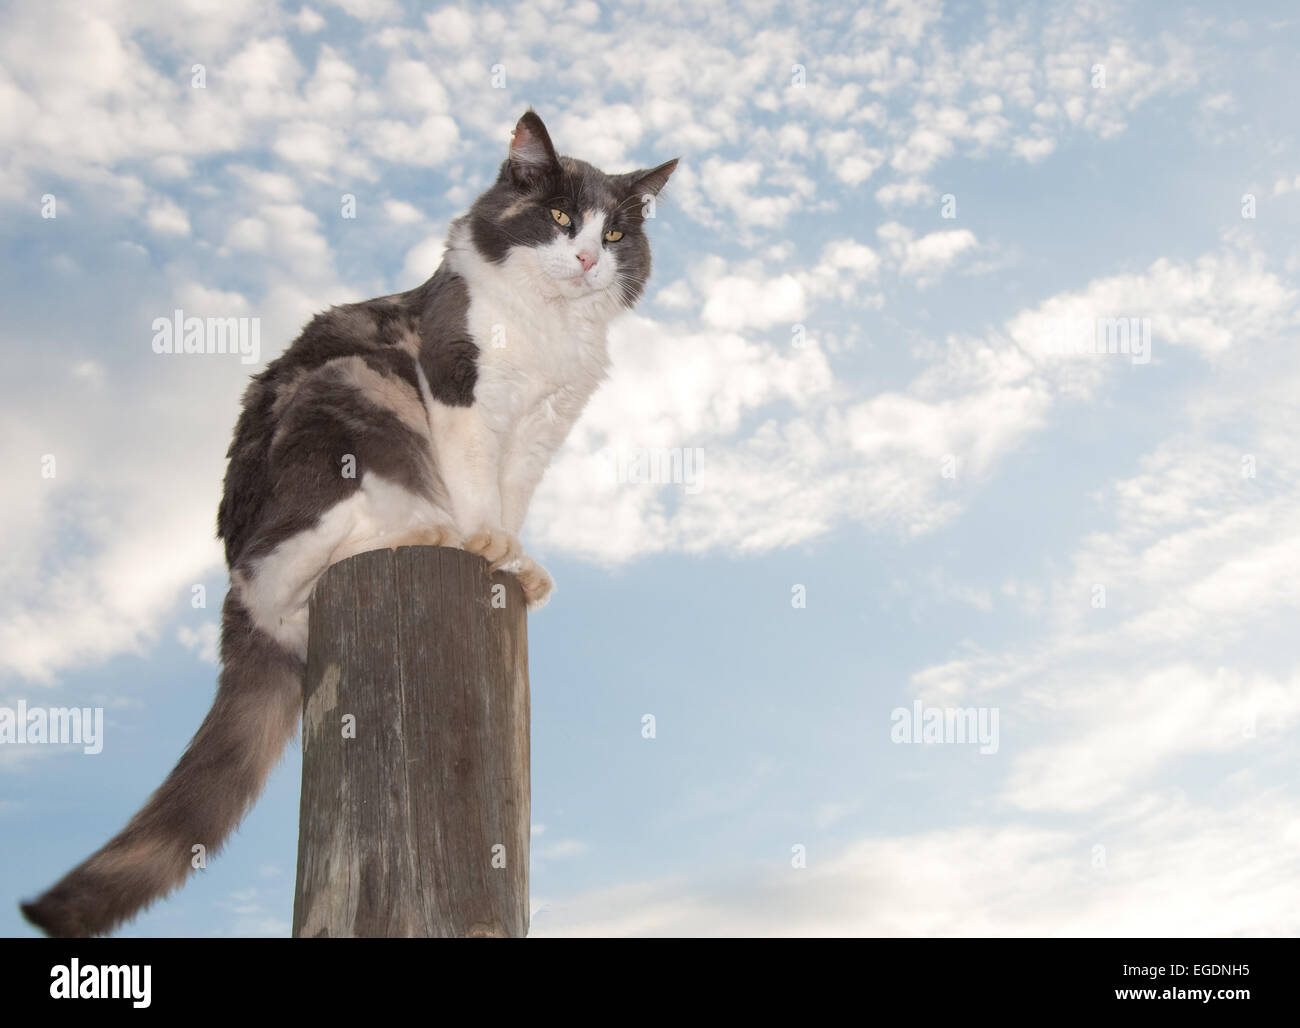 Diluted calico cat sitting on a fence post against cloudy skies Stock Photo